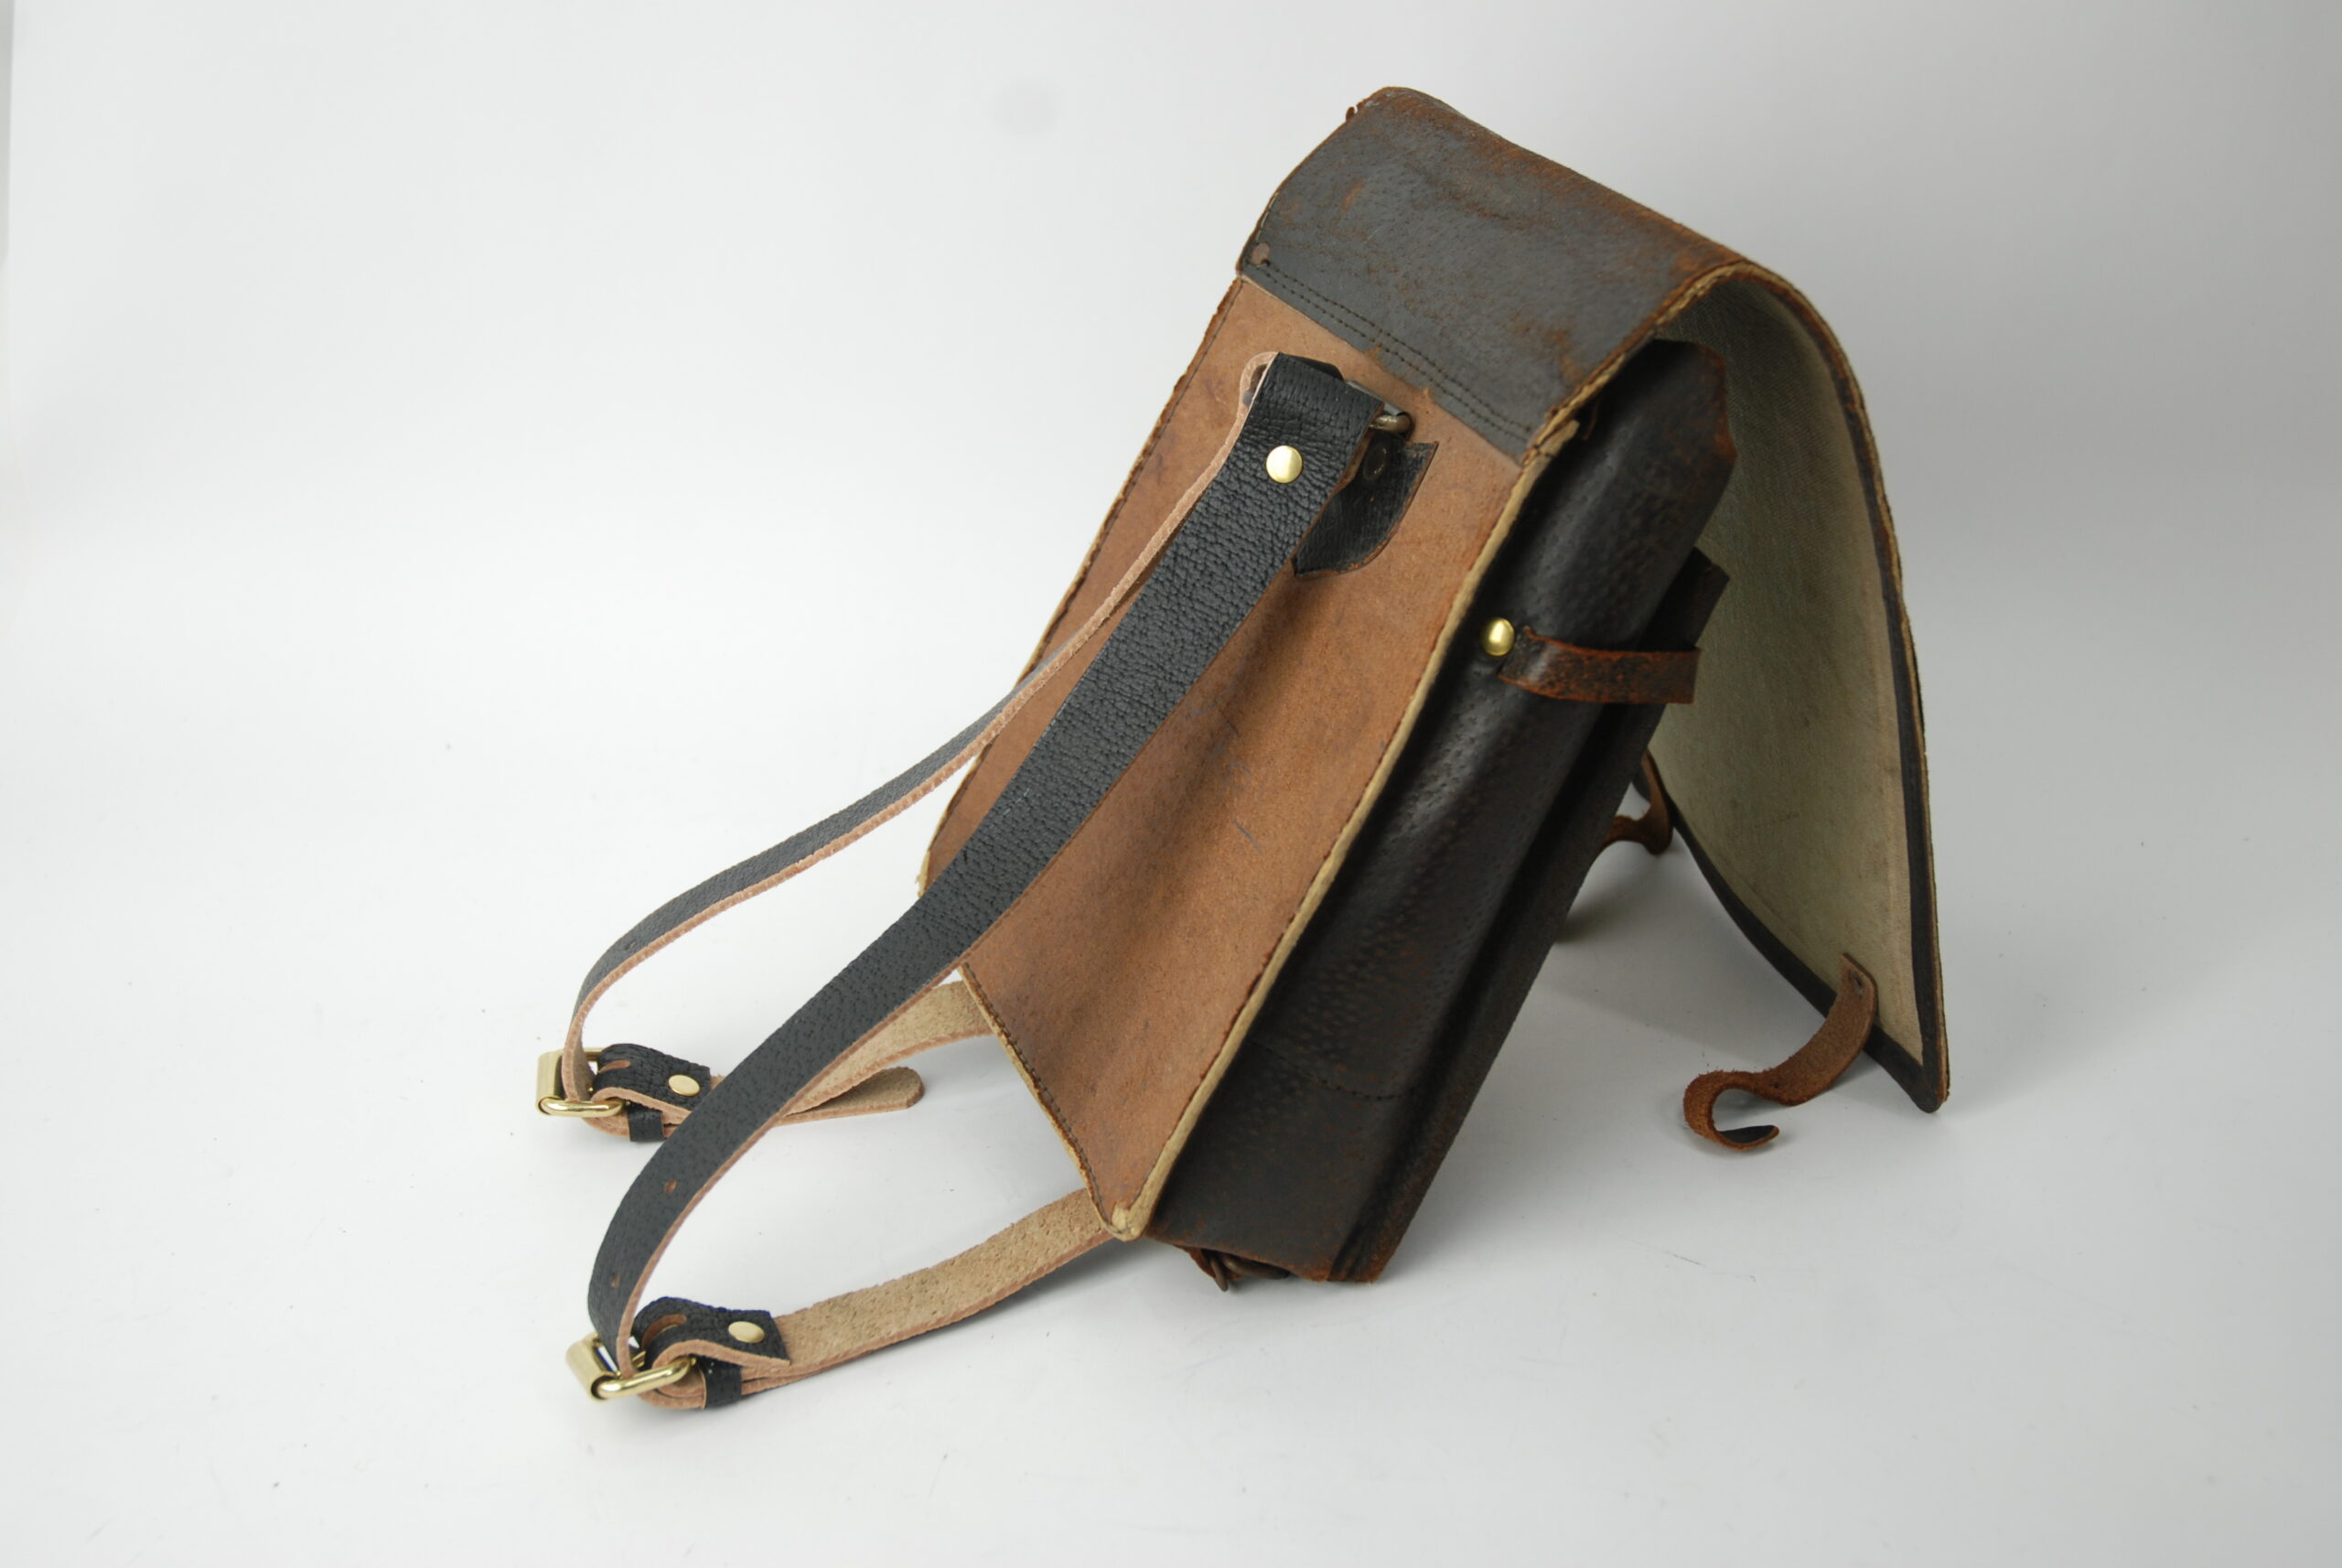 A repaired bag, with new backpack straps